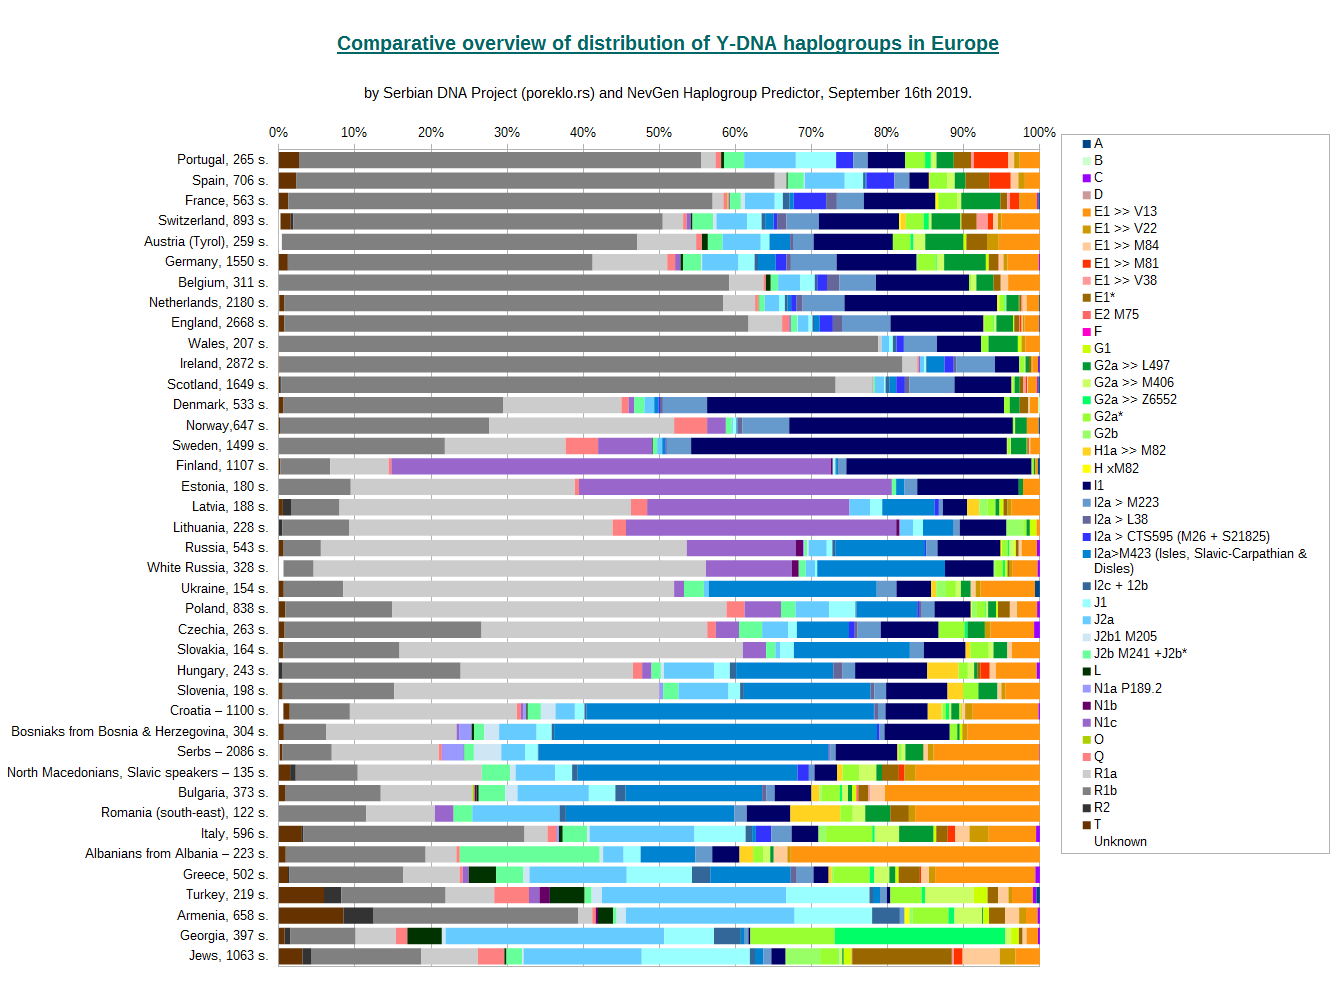 Comparative overview of distribution of Y-DNA haplogroups in Europe - horizontal bars